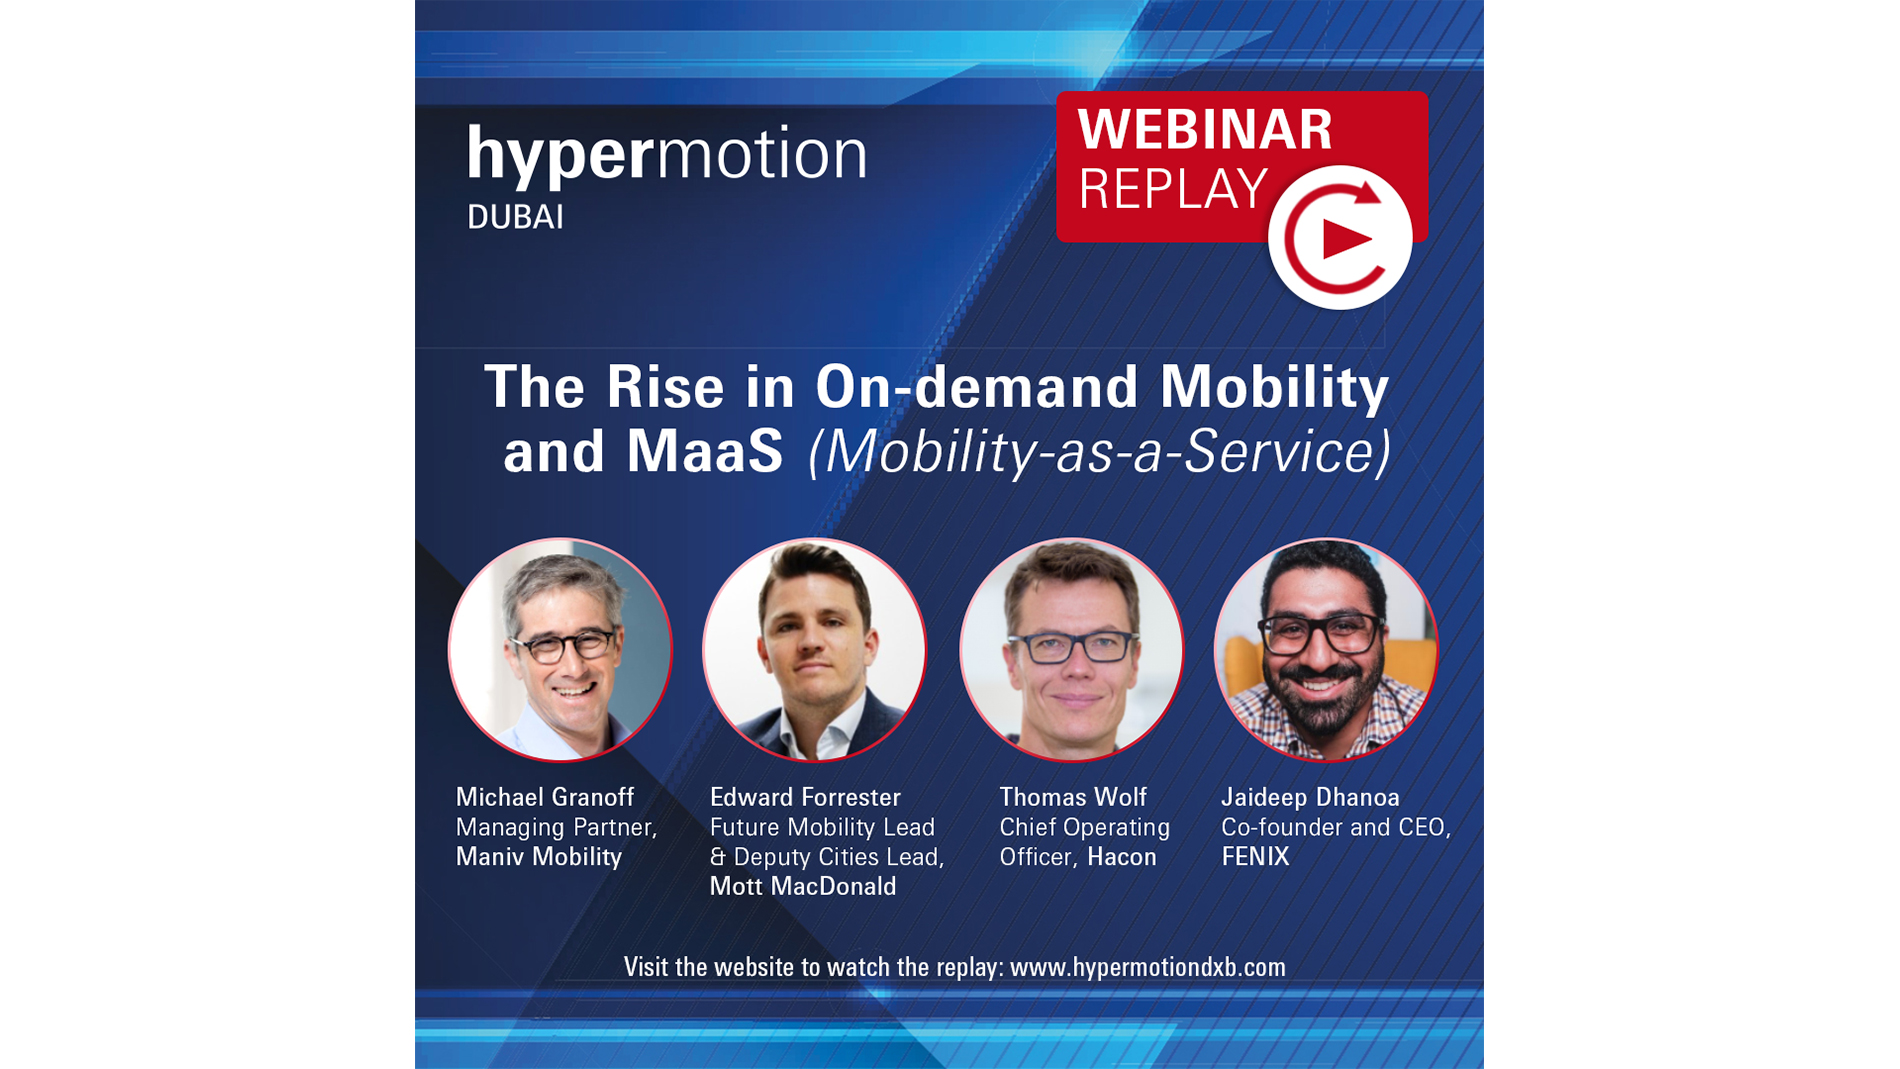 Hypermotion Dubai - The rise in on-demand Mobility and MaaS webinar